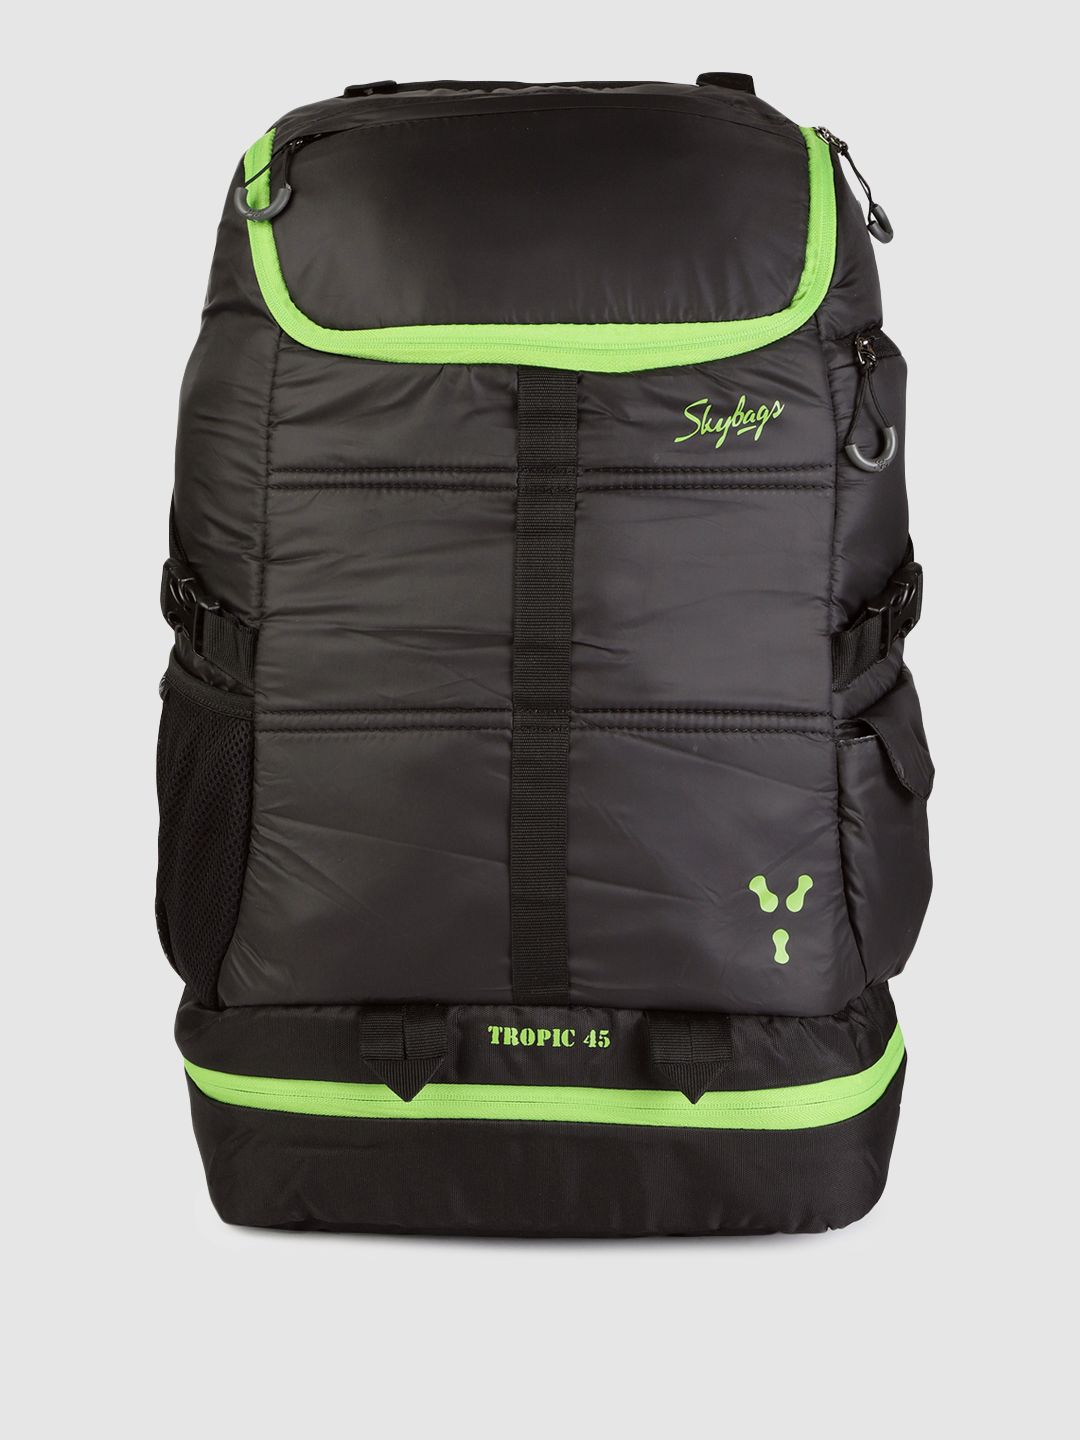 Skybags Black Backpack with Compression Straps Price in India